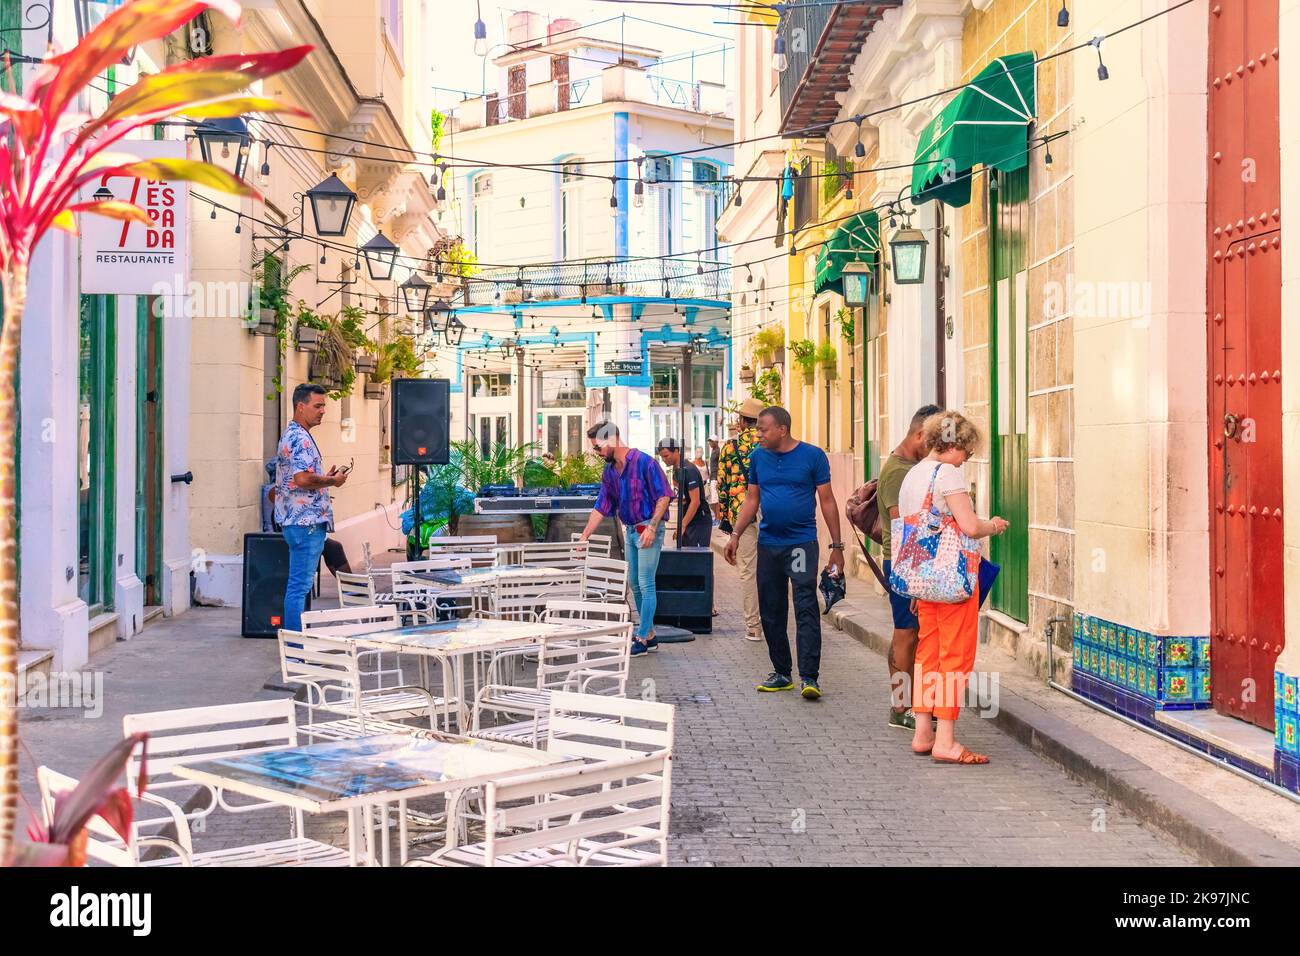 Cuban people setting patio restaurant tables in an Old Havana alley. Incidental tourists are also in the scene. Stock Photo